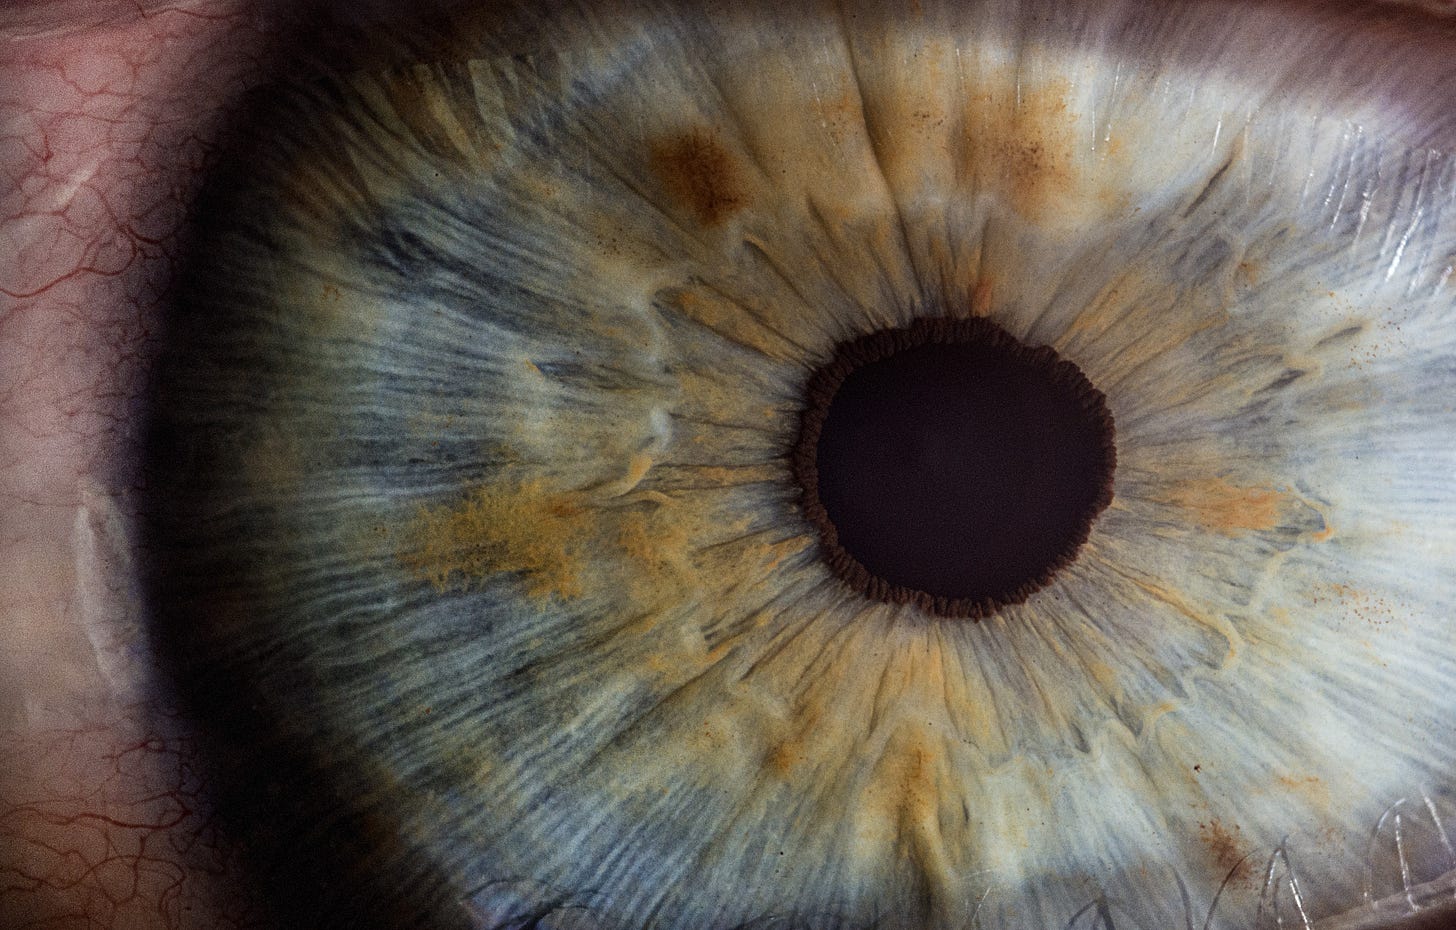 Extreme close up of an eye, the pupil and the iris. Blue/white/orange.